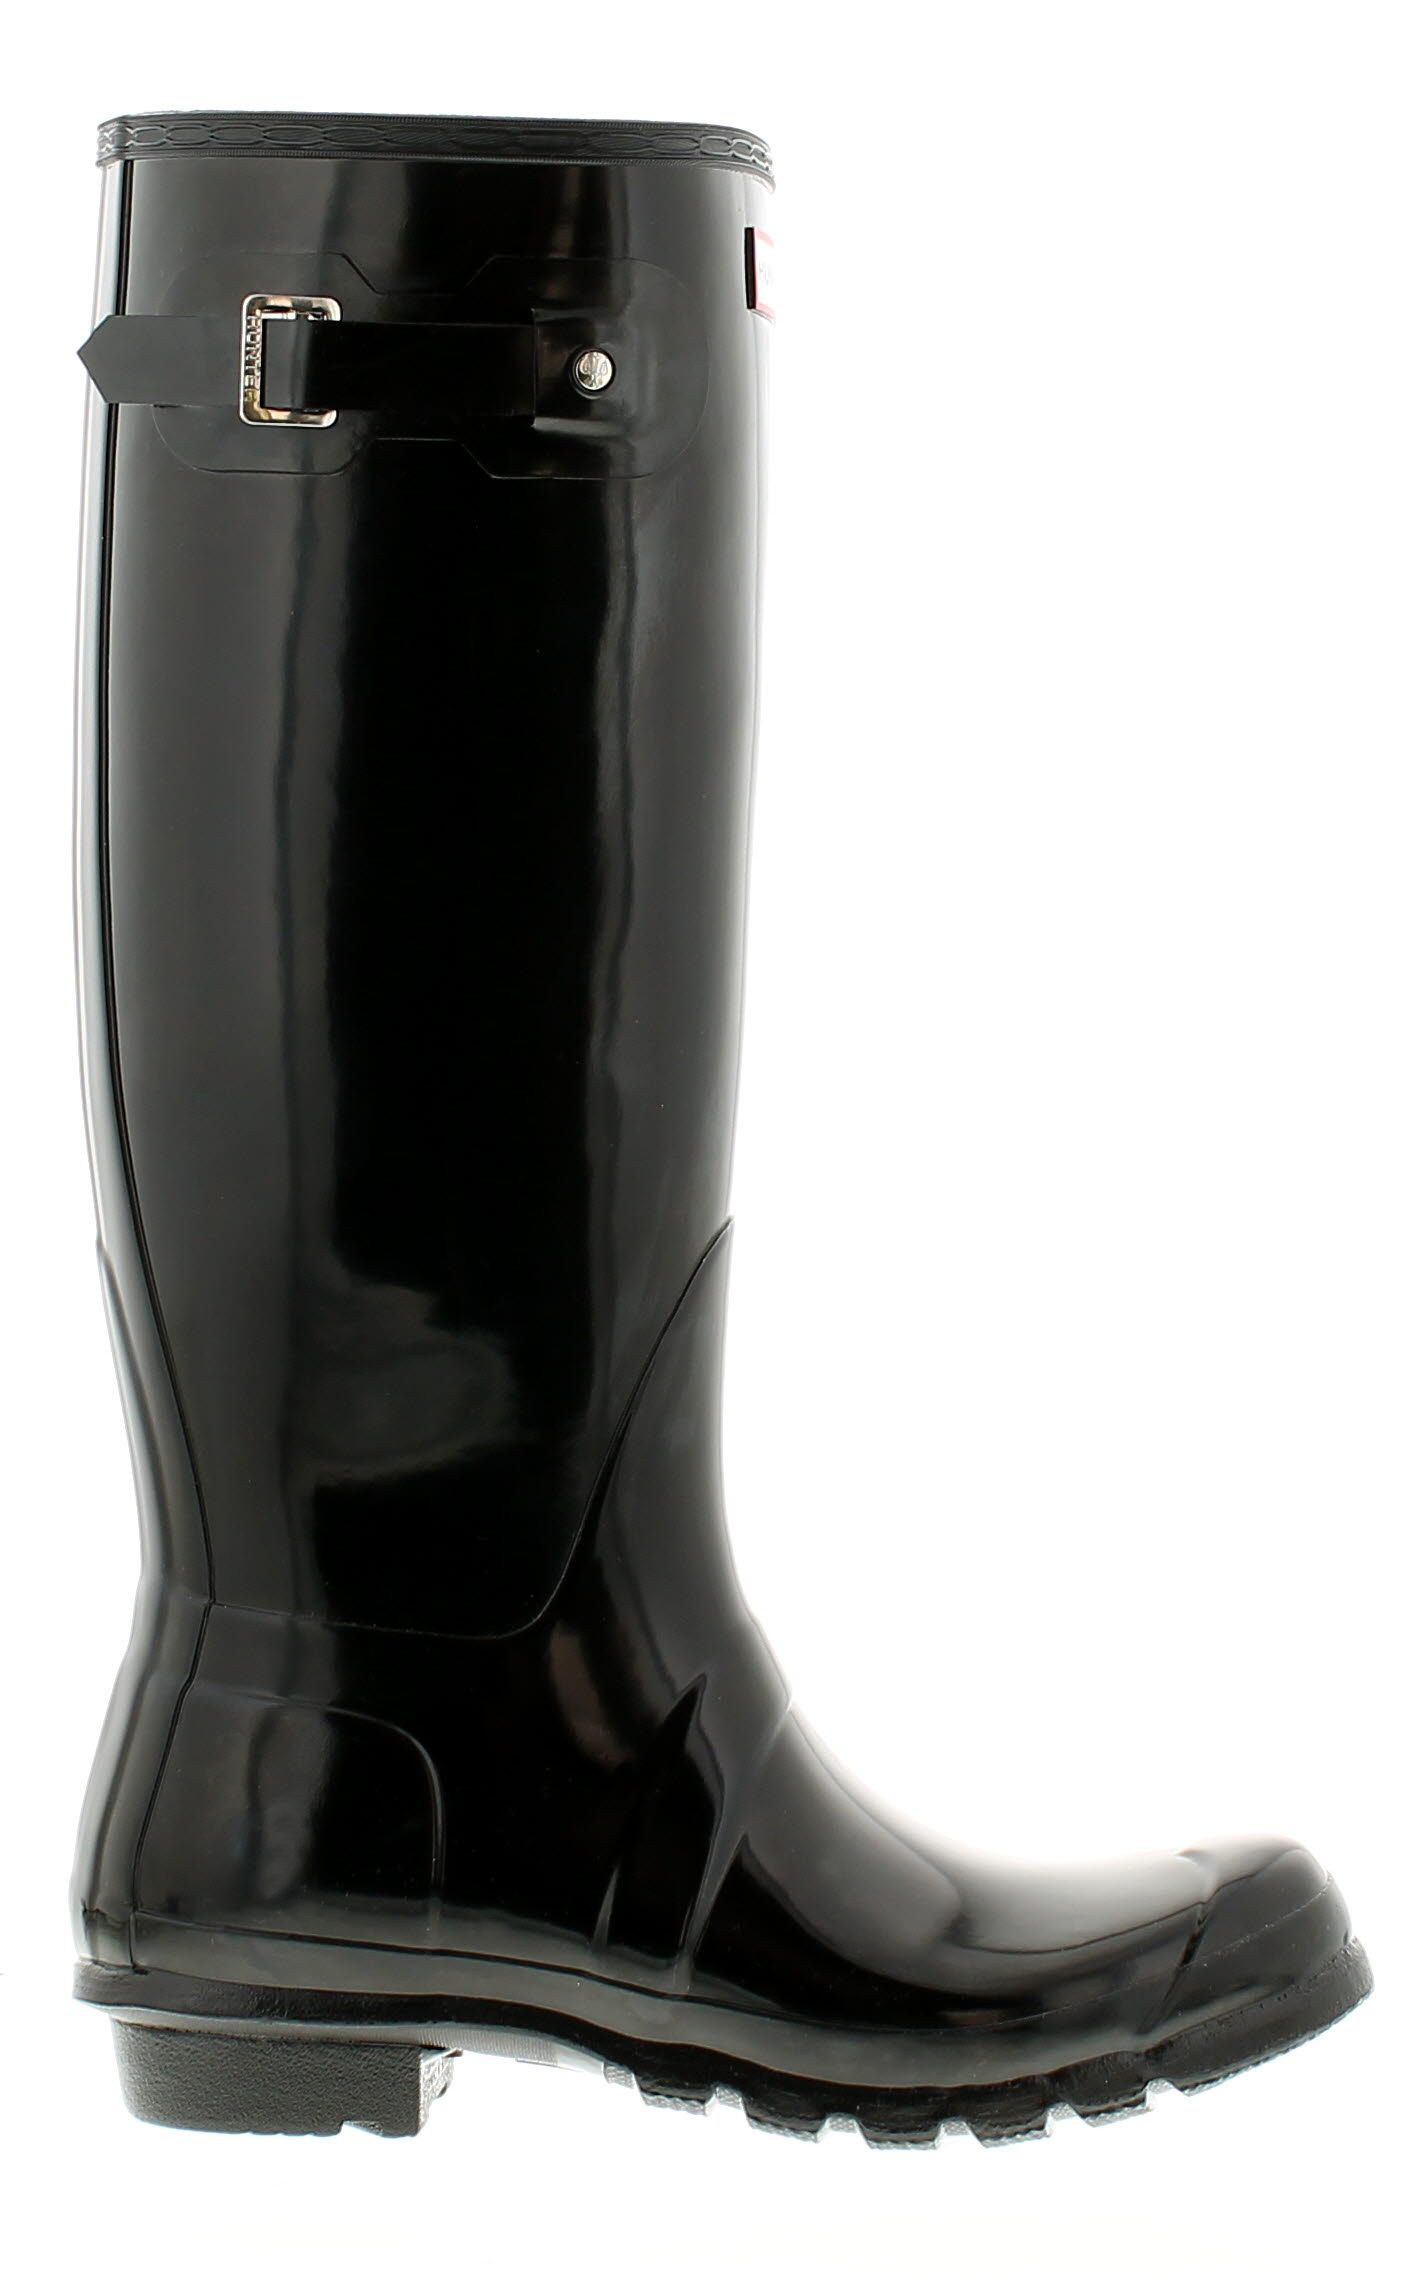 First introduced in 1956, the Original Tall welly is handcrafted from 28 parts and built on the original last for exceptional fit and comfort. This particular style is finished in a high gloss. Handcrafted. 
Waterproof. 
Textile lining. 
Original calendered outsole. 
Adjustable strap to enhance fit.